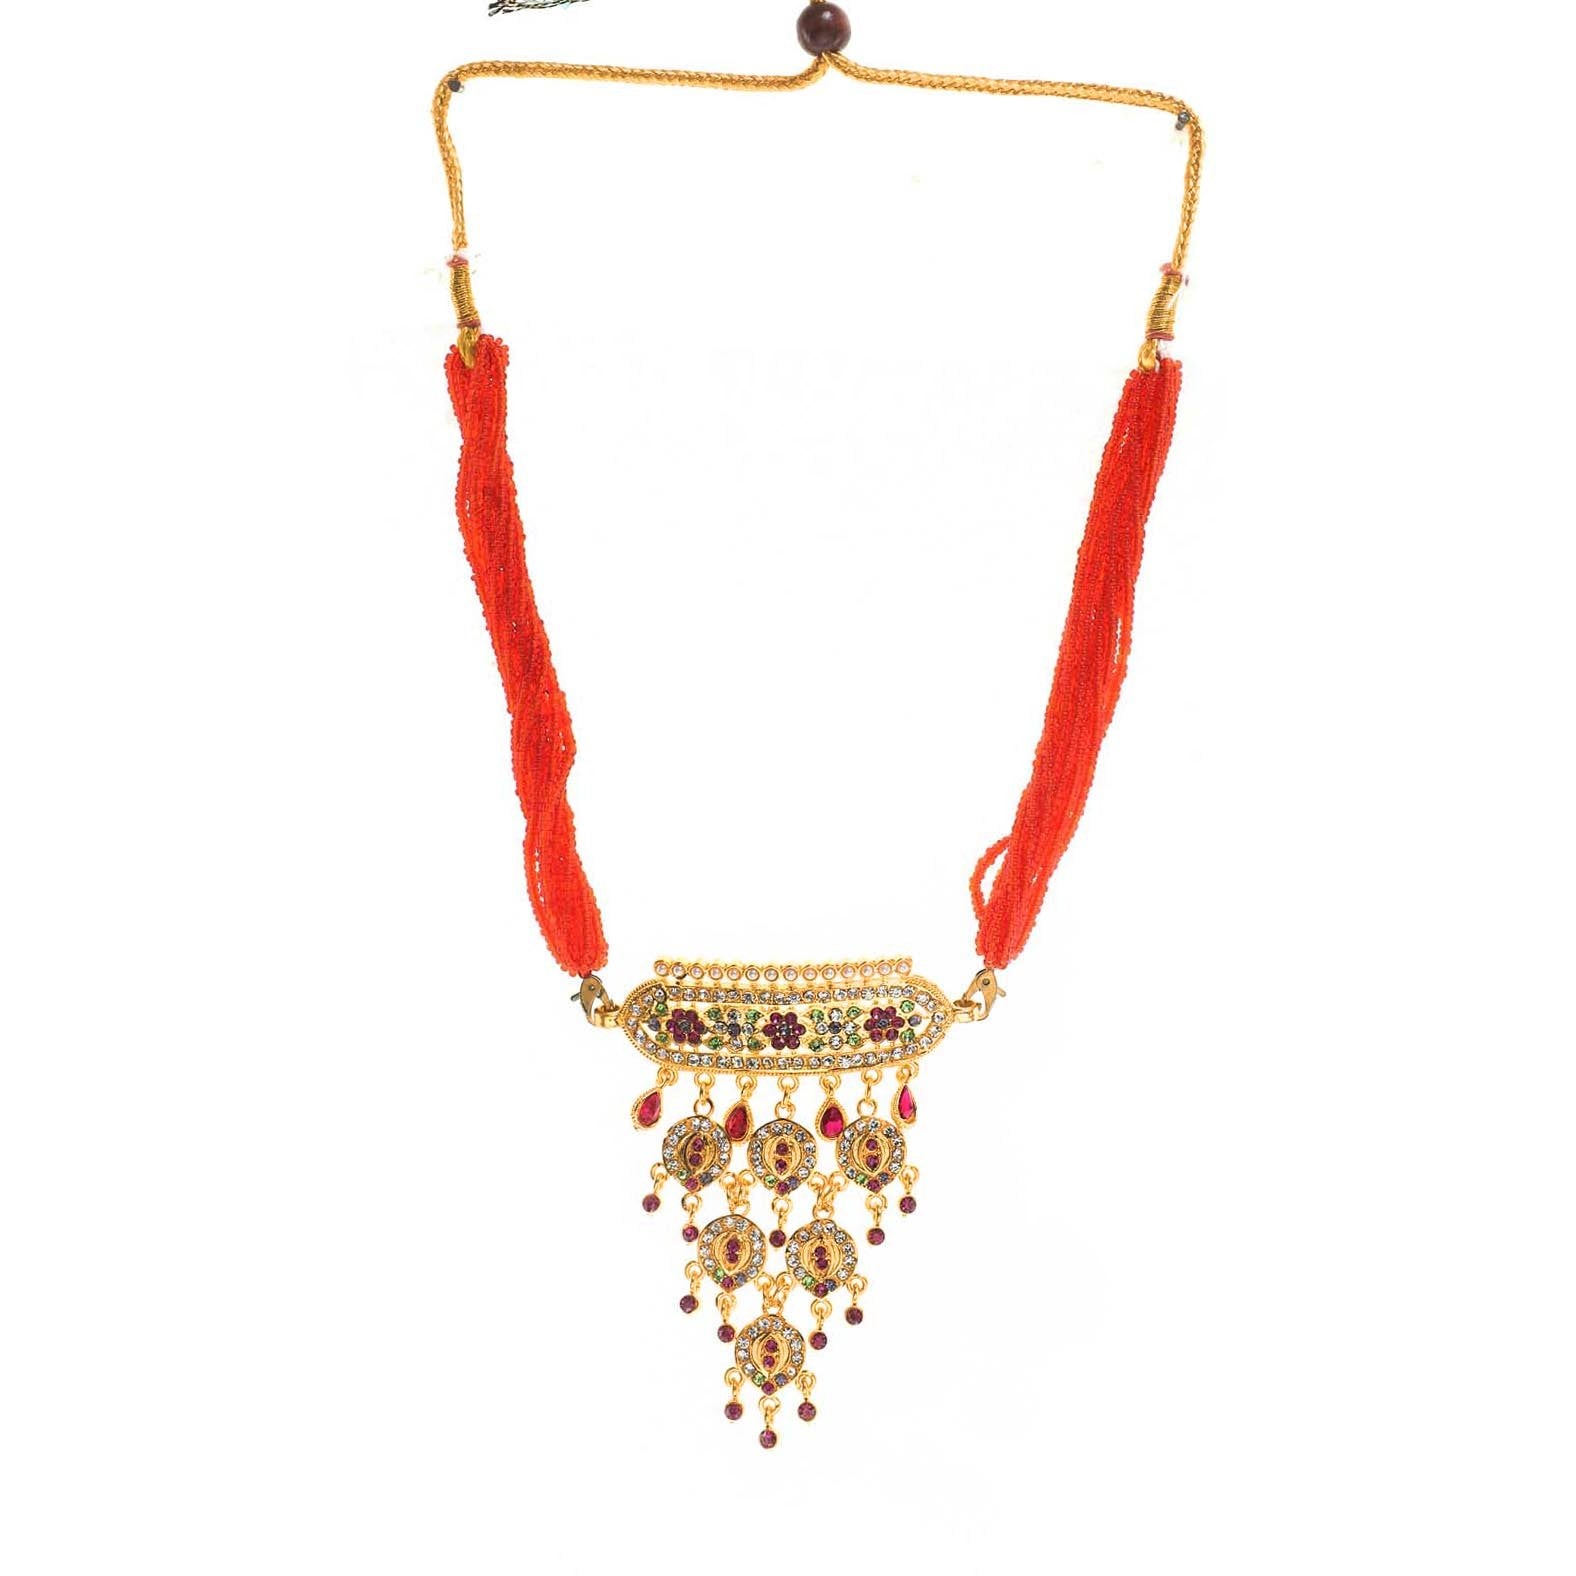 Rajasthani Gold Plated Aad Beaded With Rani Color Beads